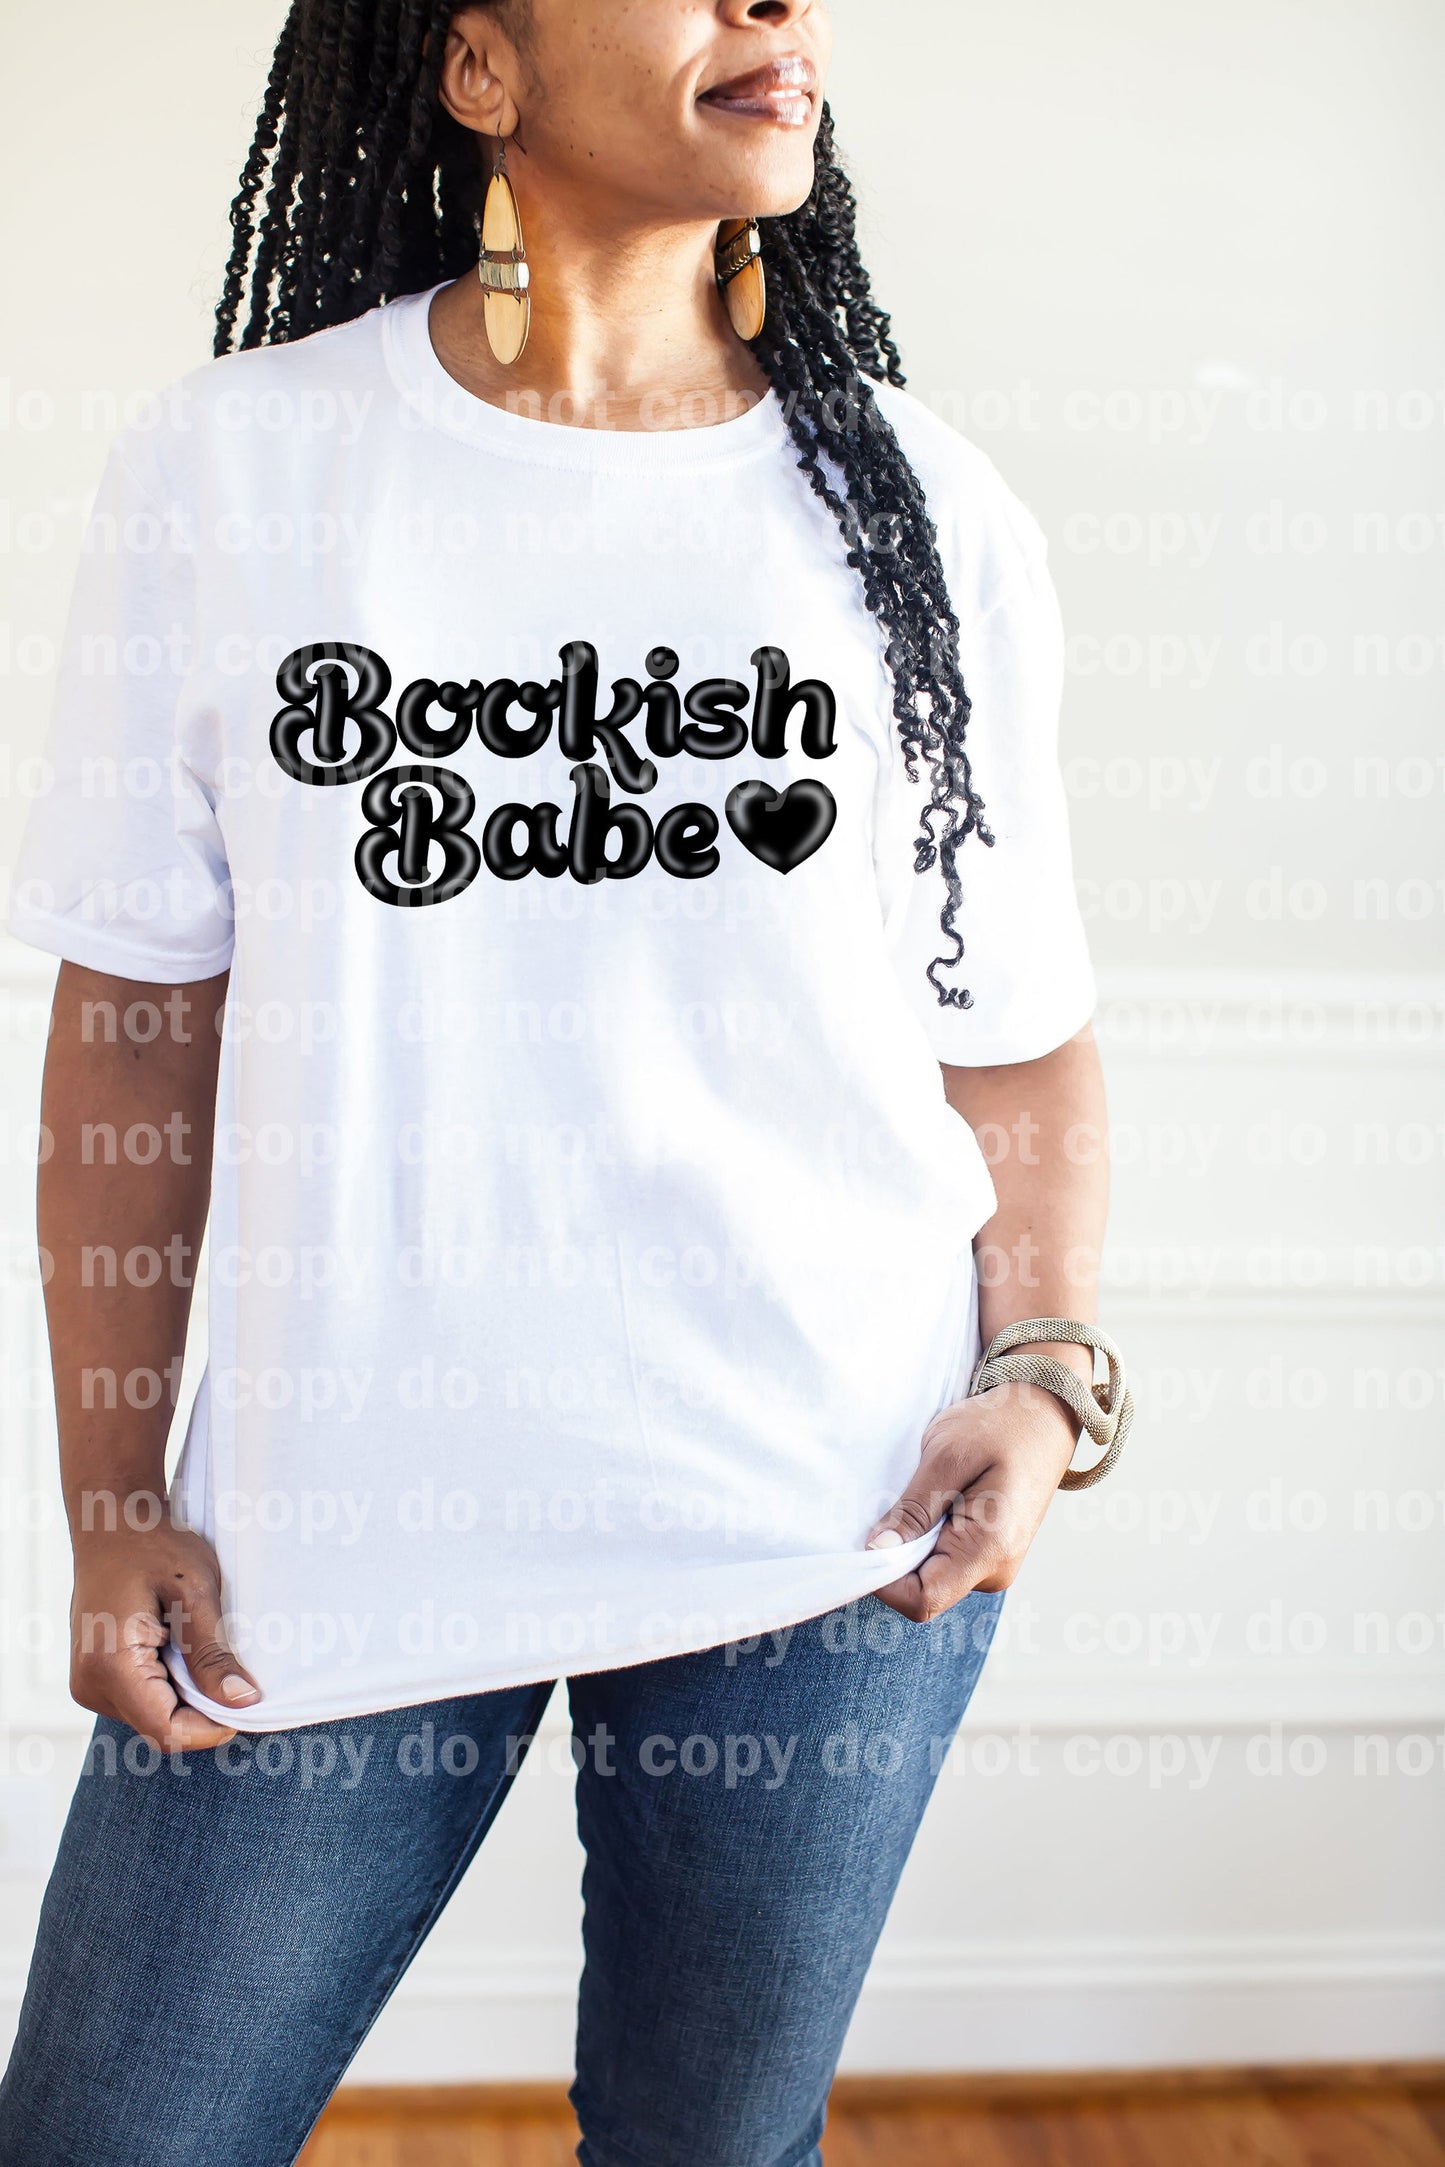 Bookish Babe Black/Pink Dream Print or Sublimation Print